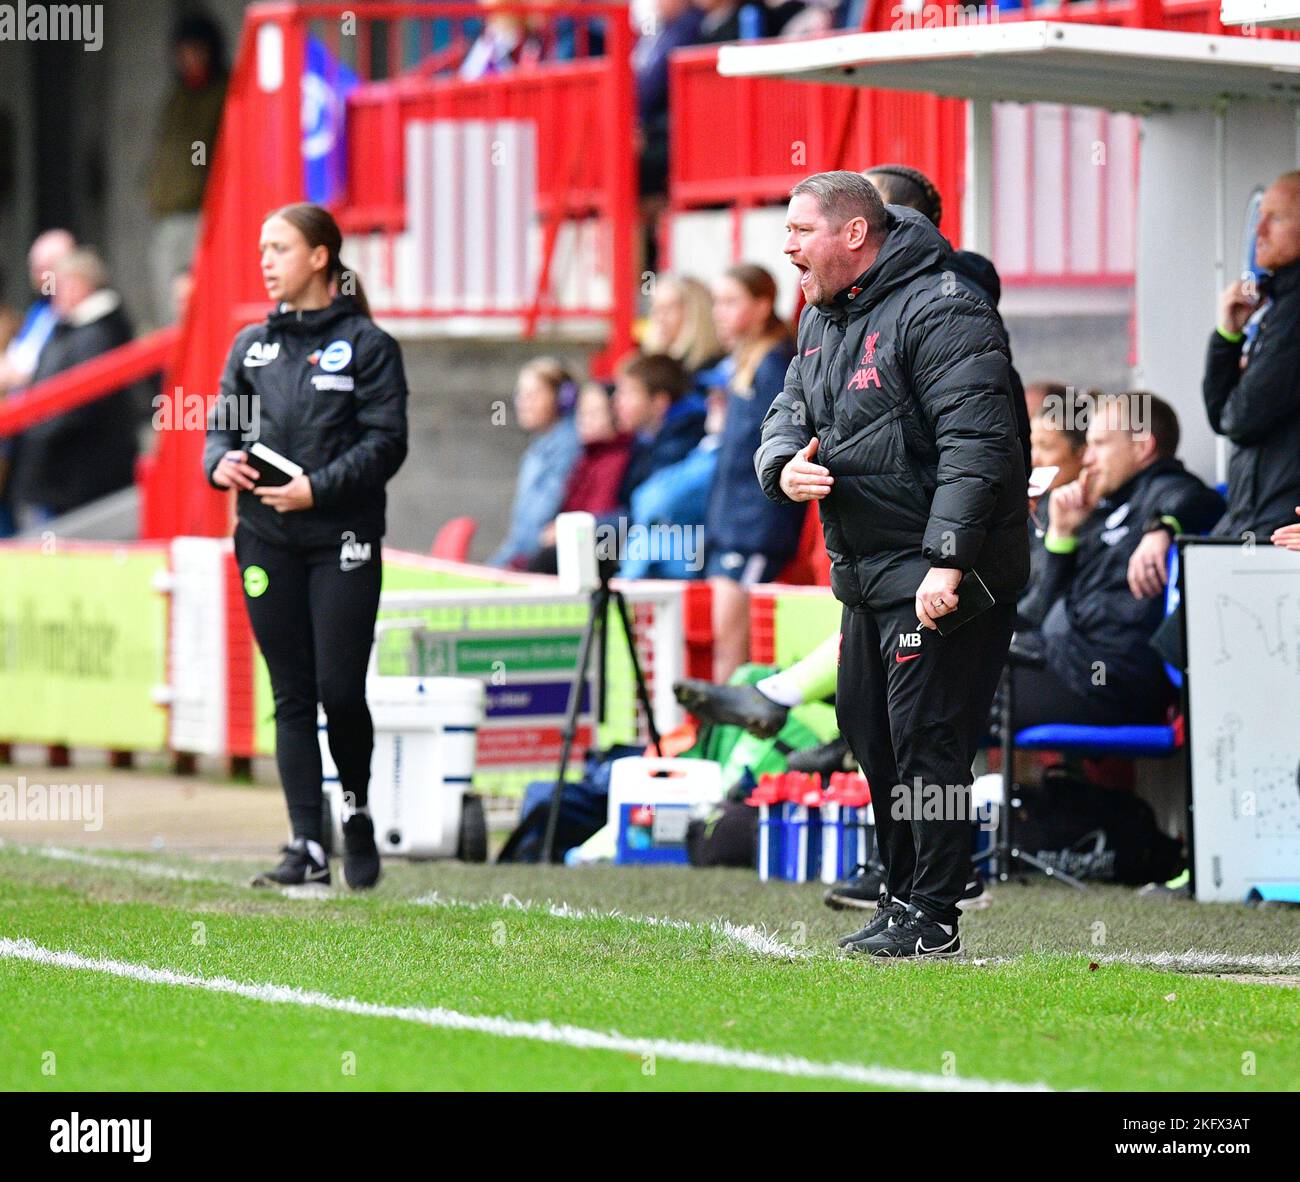 Crawley, UK. 20th Nov, 2022. Matt Beard Manager of Liverpool shows his frustration during the FA Women's Super League match between Brighton & Hove Albion Women and Liverpool Women at The People's Pension Stadium on November 20th 2022 in Crawley, United Kingdom. (Photo by Jeff Mood/phcimages.com) Credit: PHC Images/Alamy Live News Stock Photo